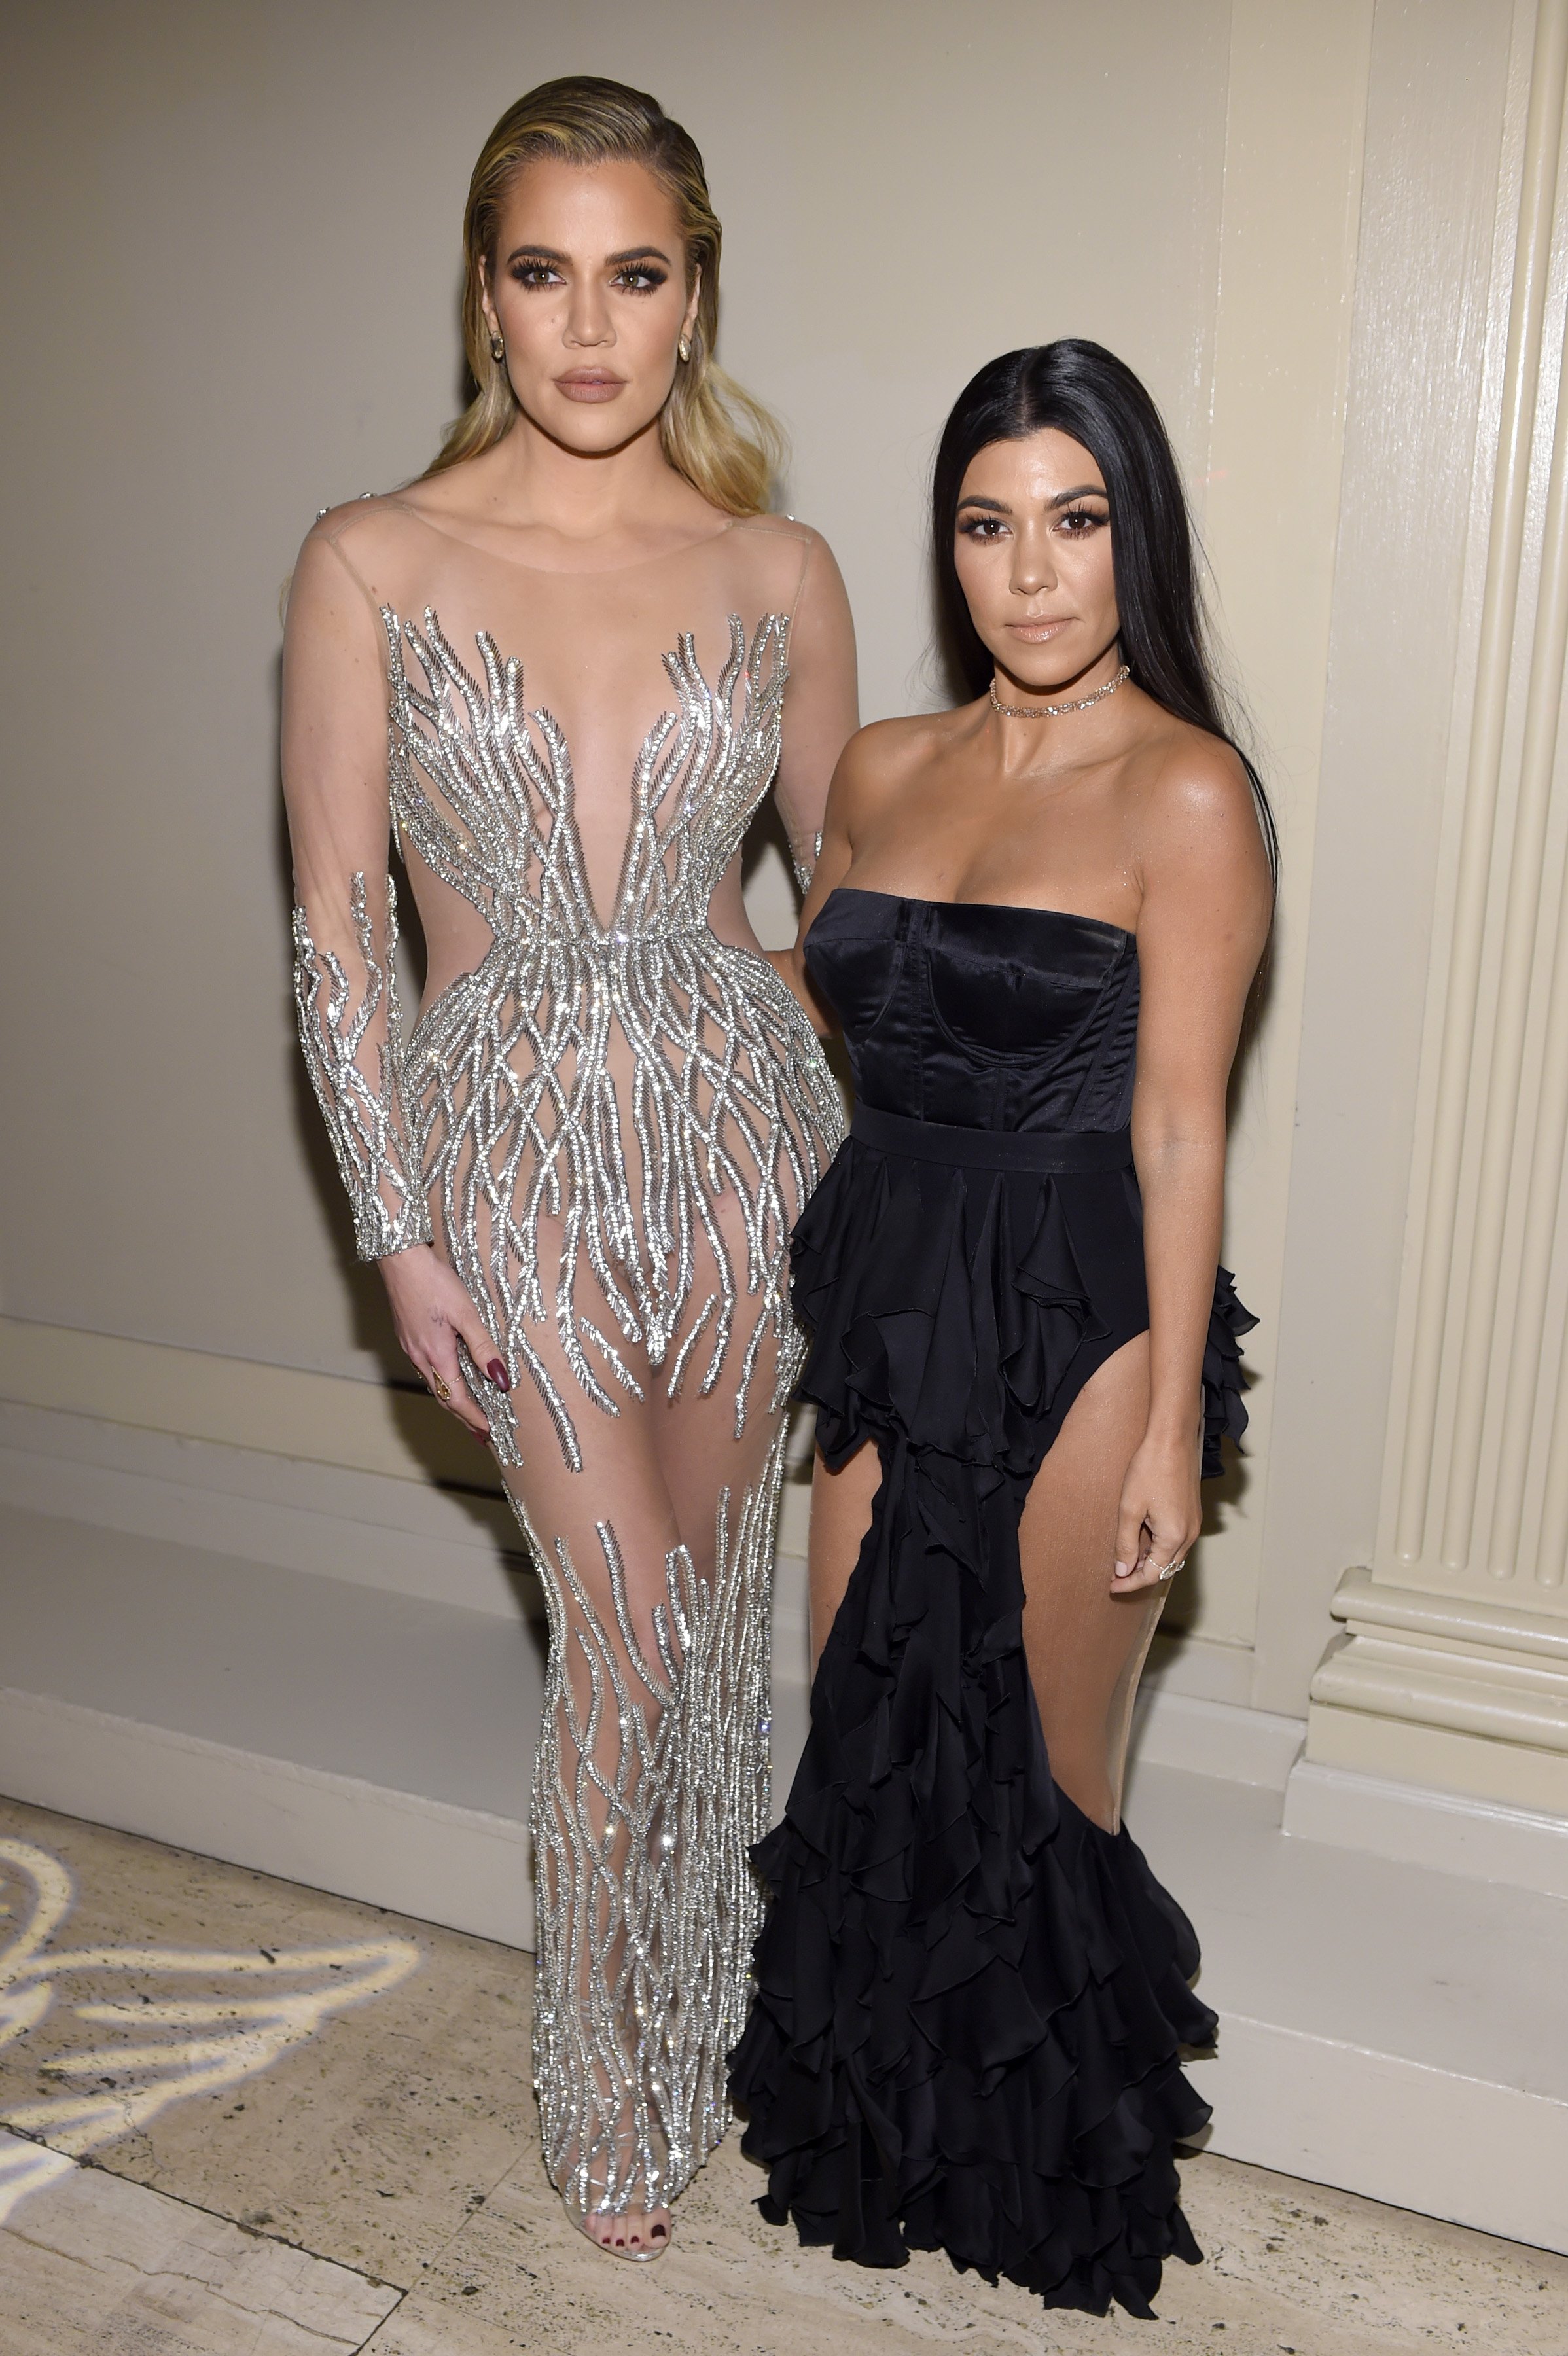 Khloé and Kourtney Kardashian at the 2016 Angel Ball hosted by Gabrielle's Angel Foundation For Cancer Research on November 21, 2016 in New York City. | Photo: Getty Images